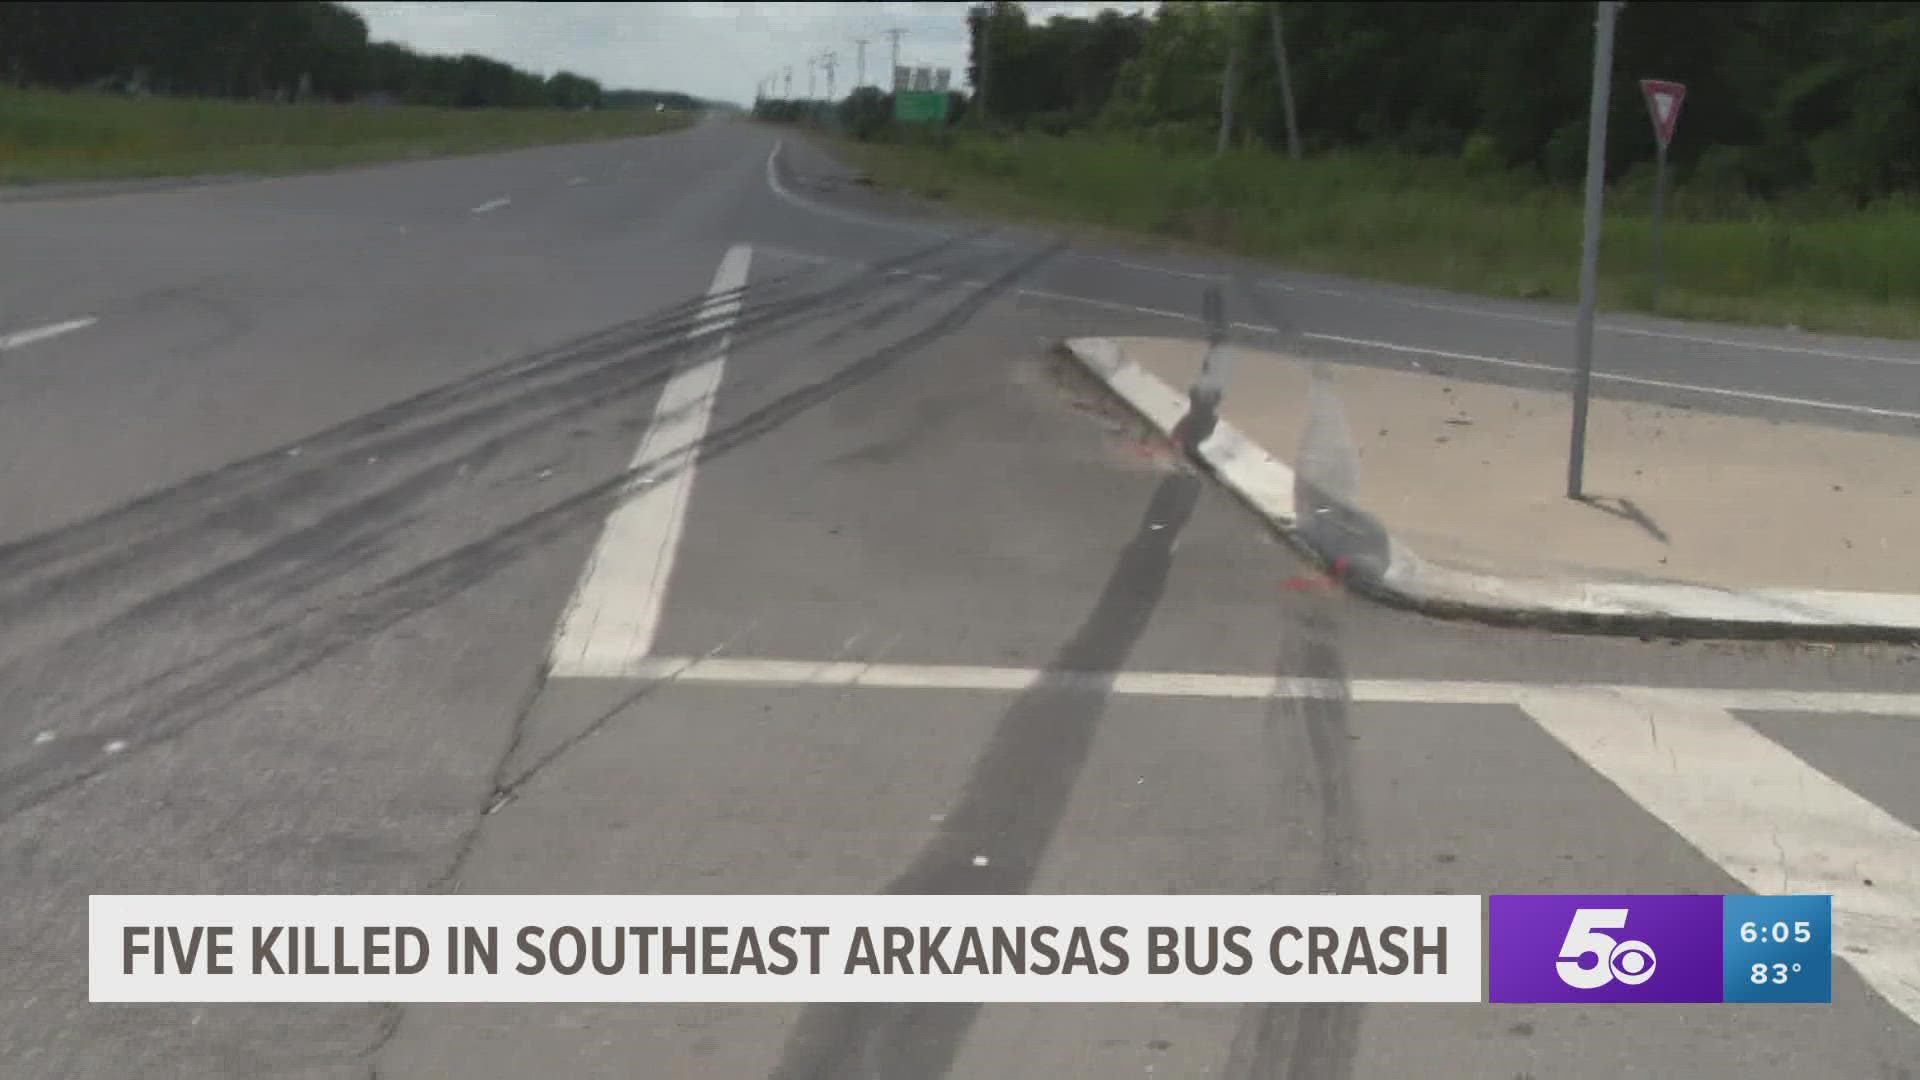 Police say the 15-passenger bus belonging to a school serving disabled adults failed to yield when crossing U.S. 65 and collided with a truck hauling cooking oil.